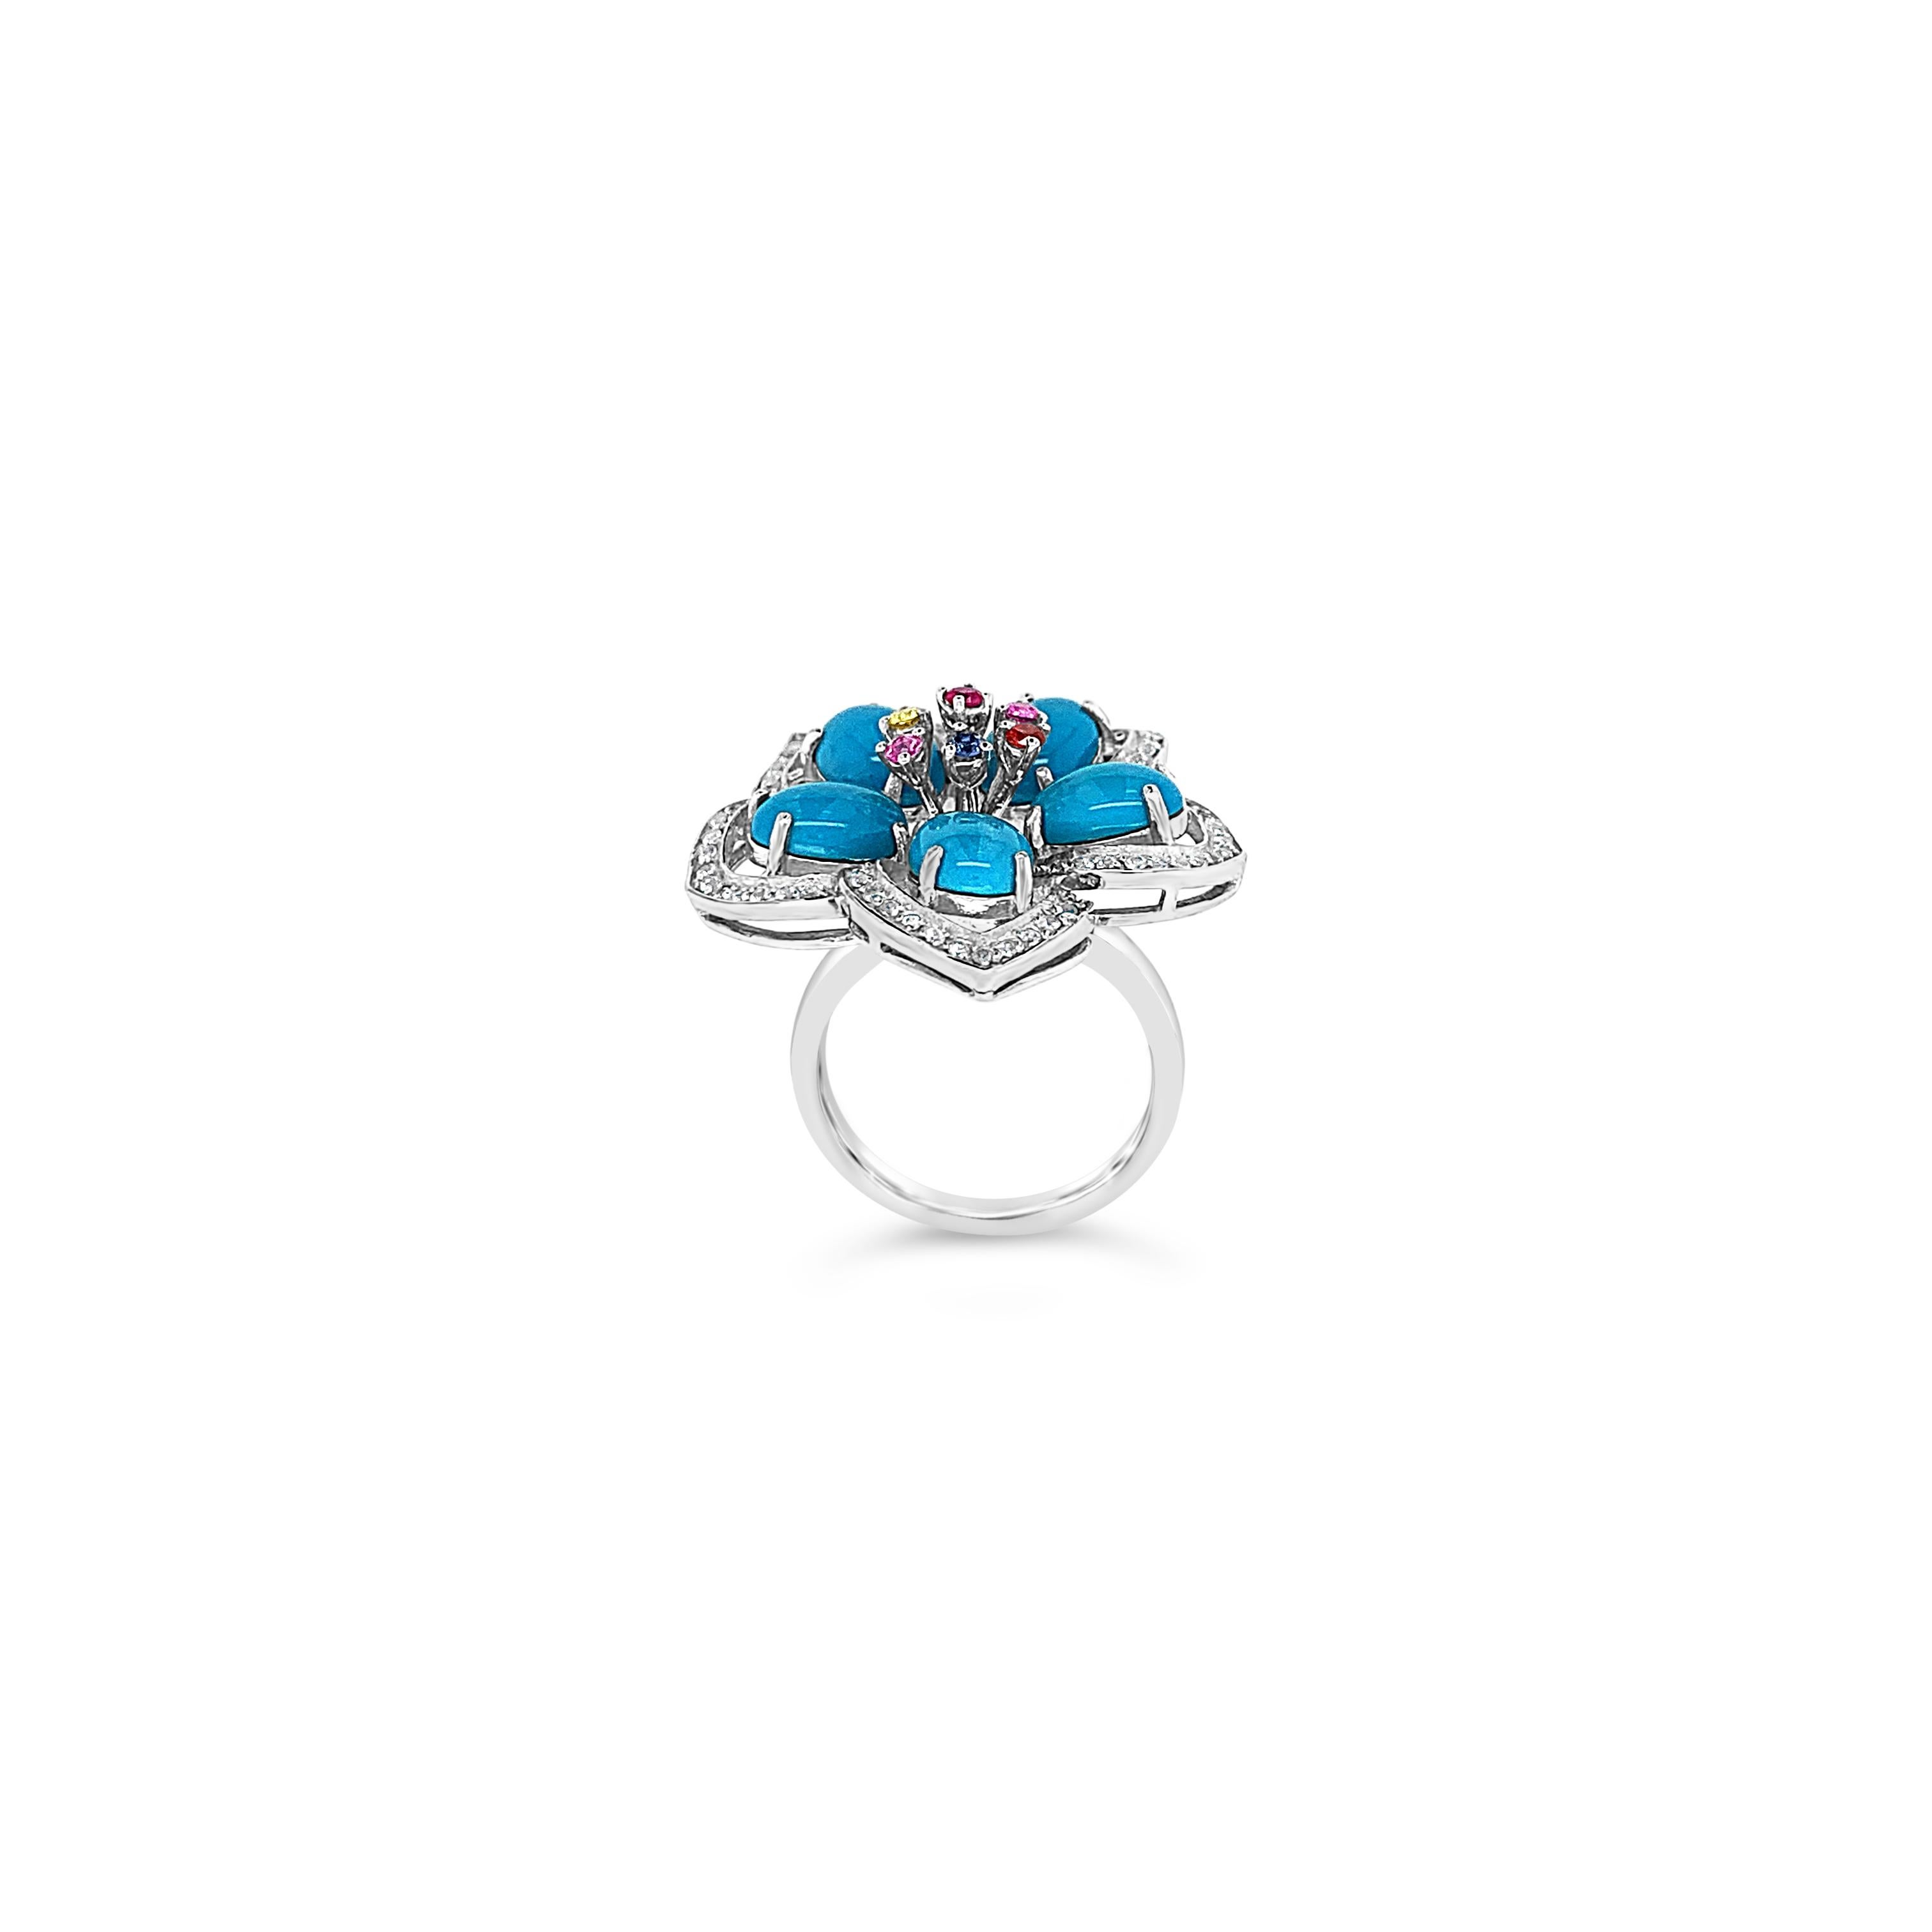 Carlo Viani® Ring featuring 4 7/8 cts. Robins Egg Blue Turquoise™, 1/8 cts. Blueberry Sapphire™, 1/8 cts. Bubble Gum Pink Sapphire™, 1/20 cts. Passion Ruby™, 1/20 cts. Orange Sapphire, 1/20 cts. Yellow Sapphire, 1/3 cts. White Sapphire, set in 14K